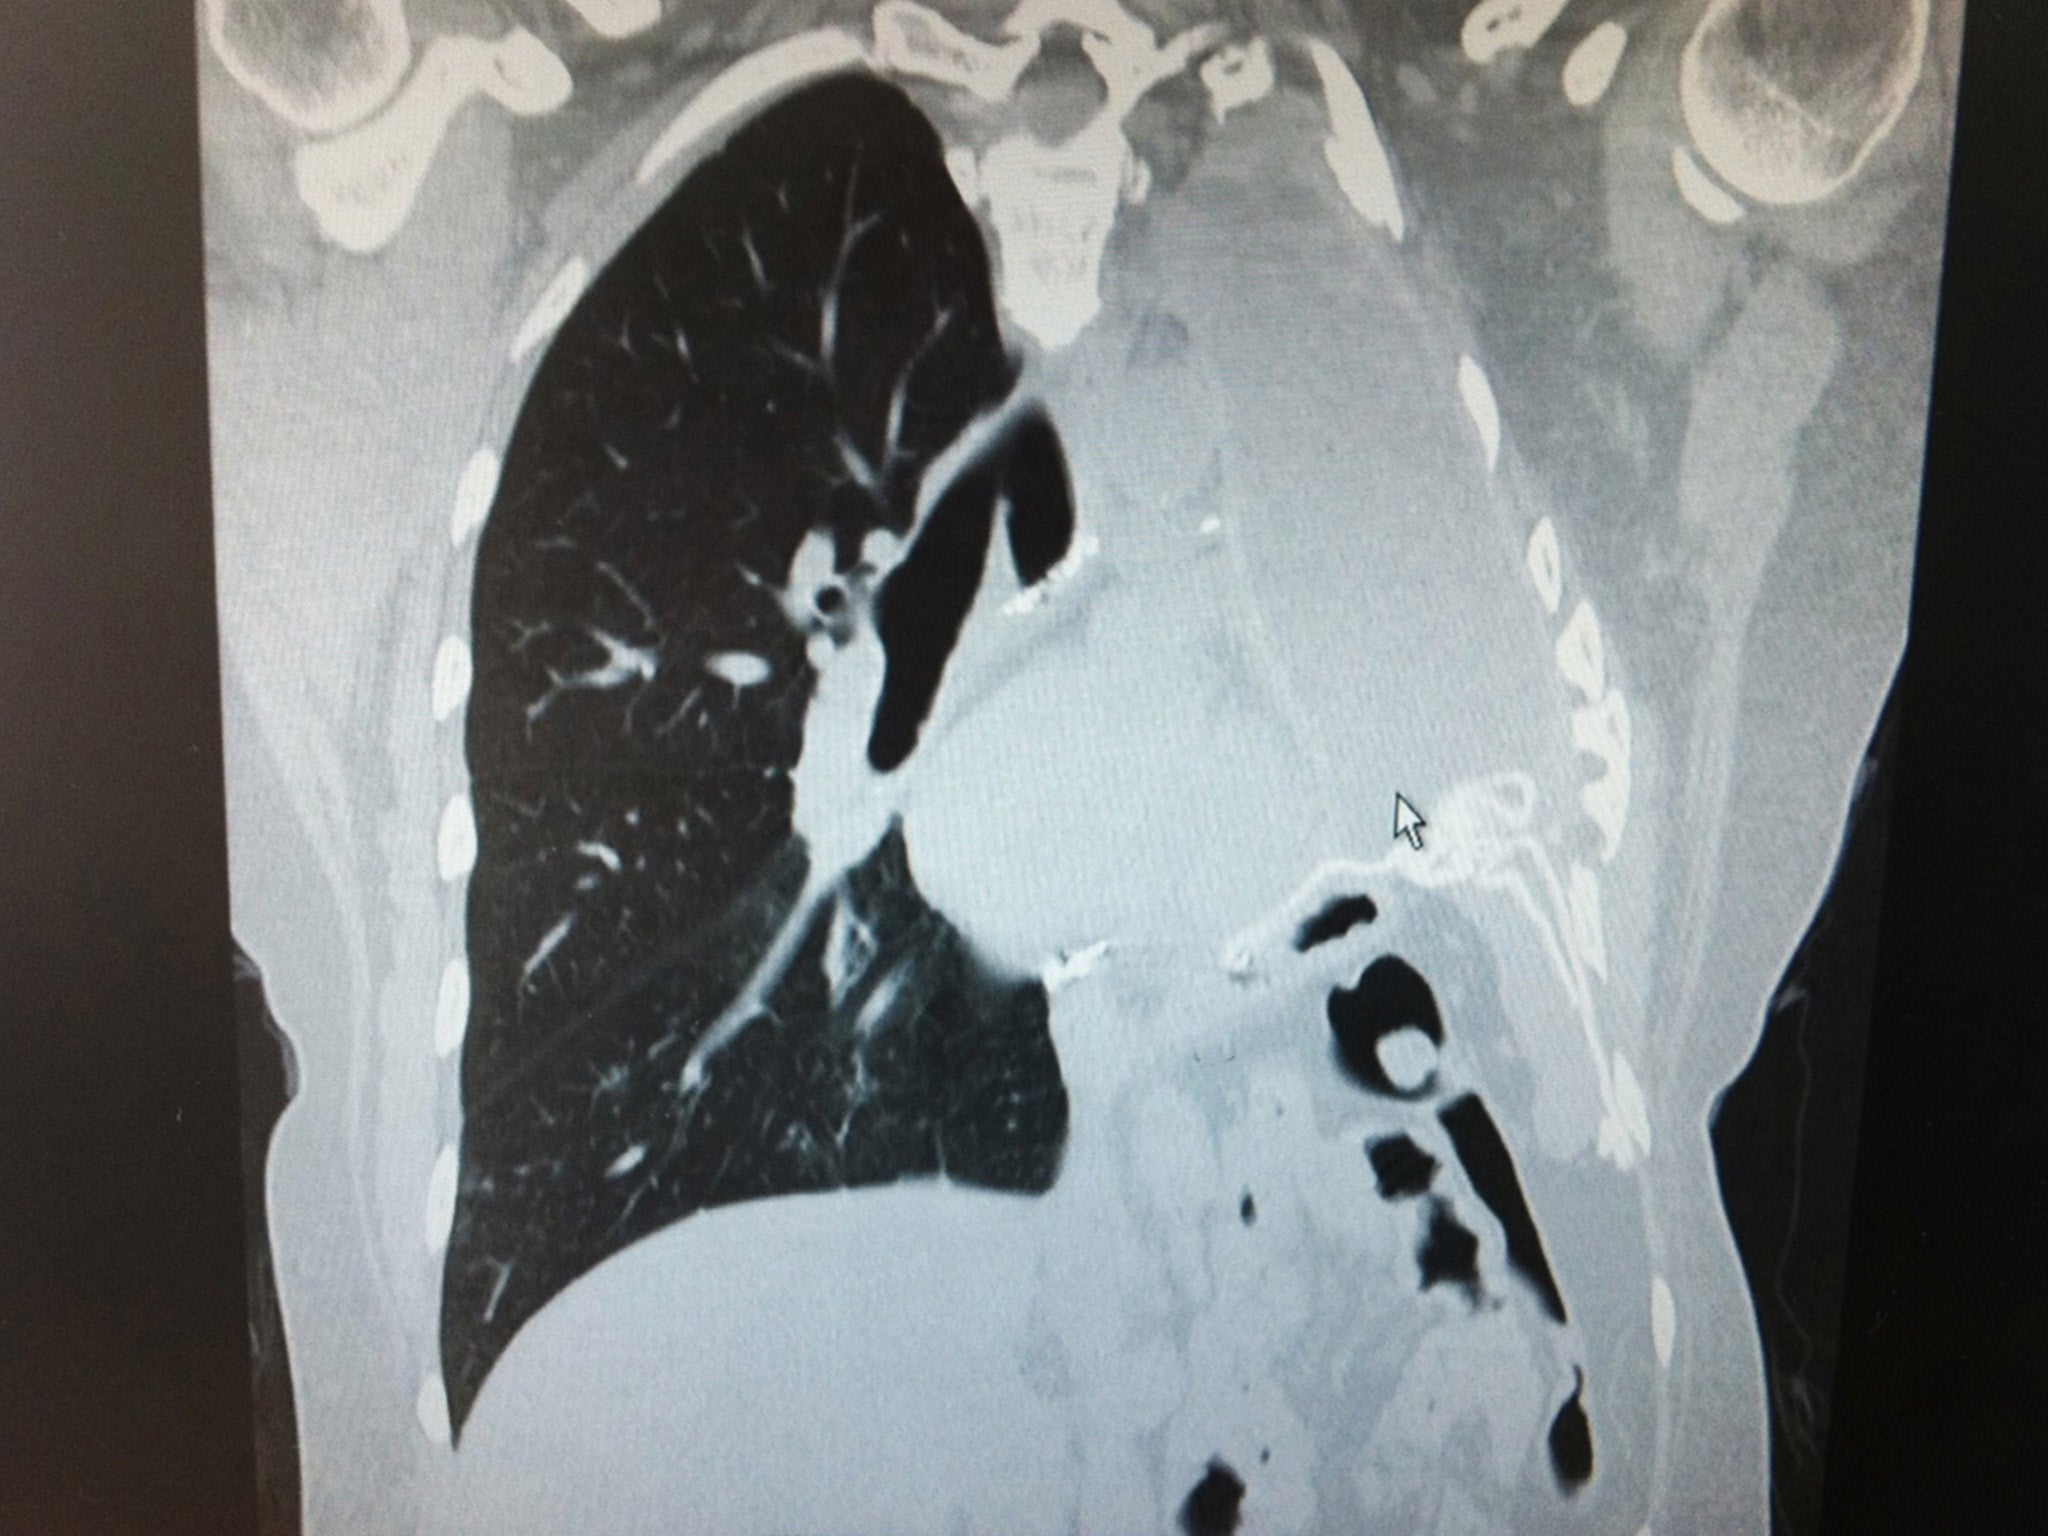 X-ray shows the missing left lung of a mesothelioma cancer sufferer